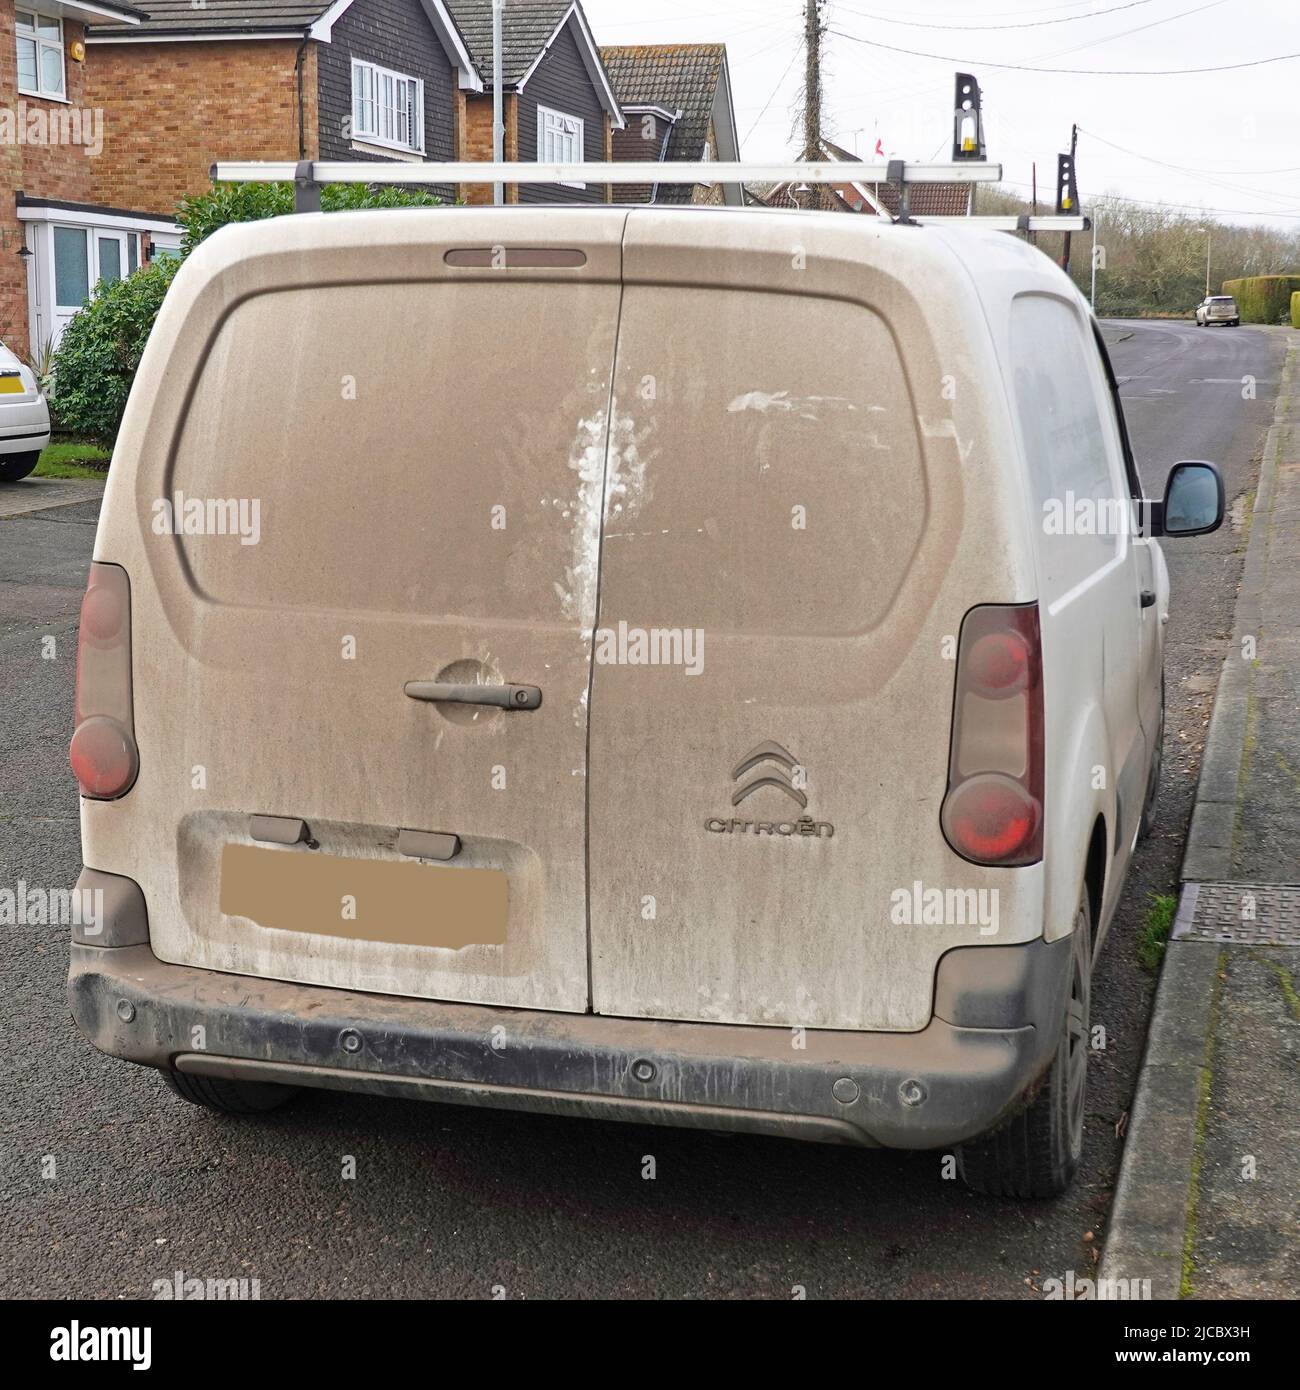 Back view of very dirty parked white Citroen van with obscured number plate otherwise just visible through the road dirt sucked onto the rear doors UK Stock Photo